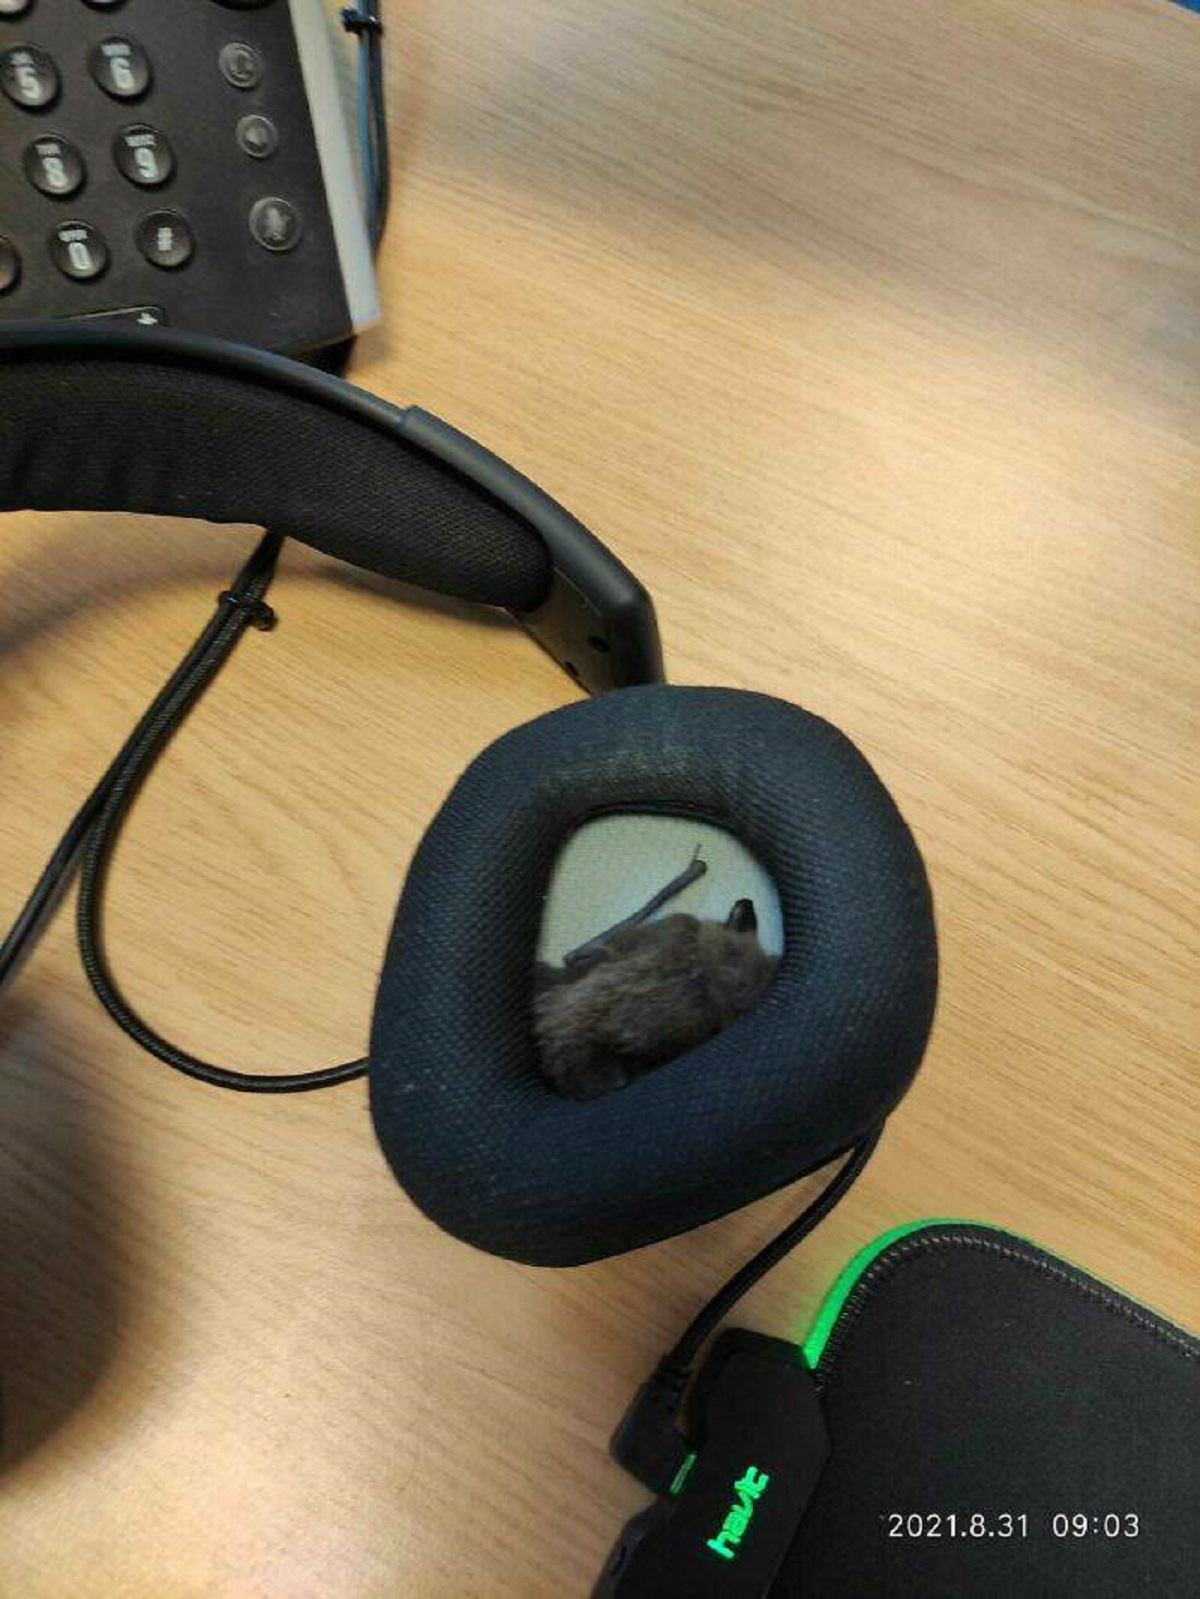 "Started Work This Morning, Put My Headset On, Felt Something Furry In My Ear, Looked And There Is A Bat In My Headset"